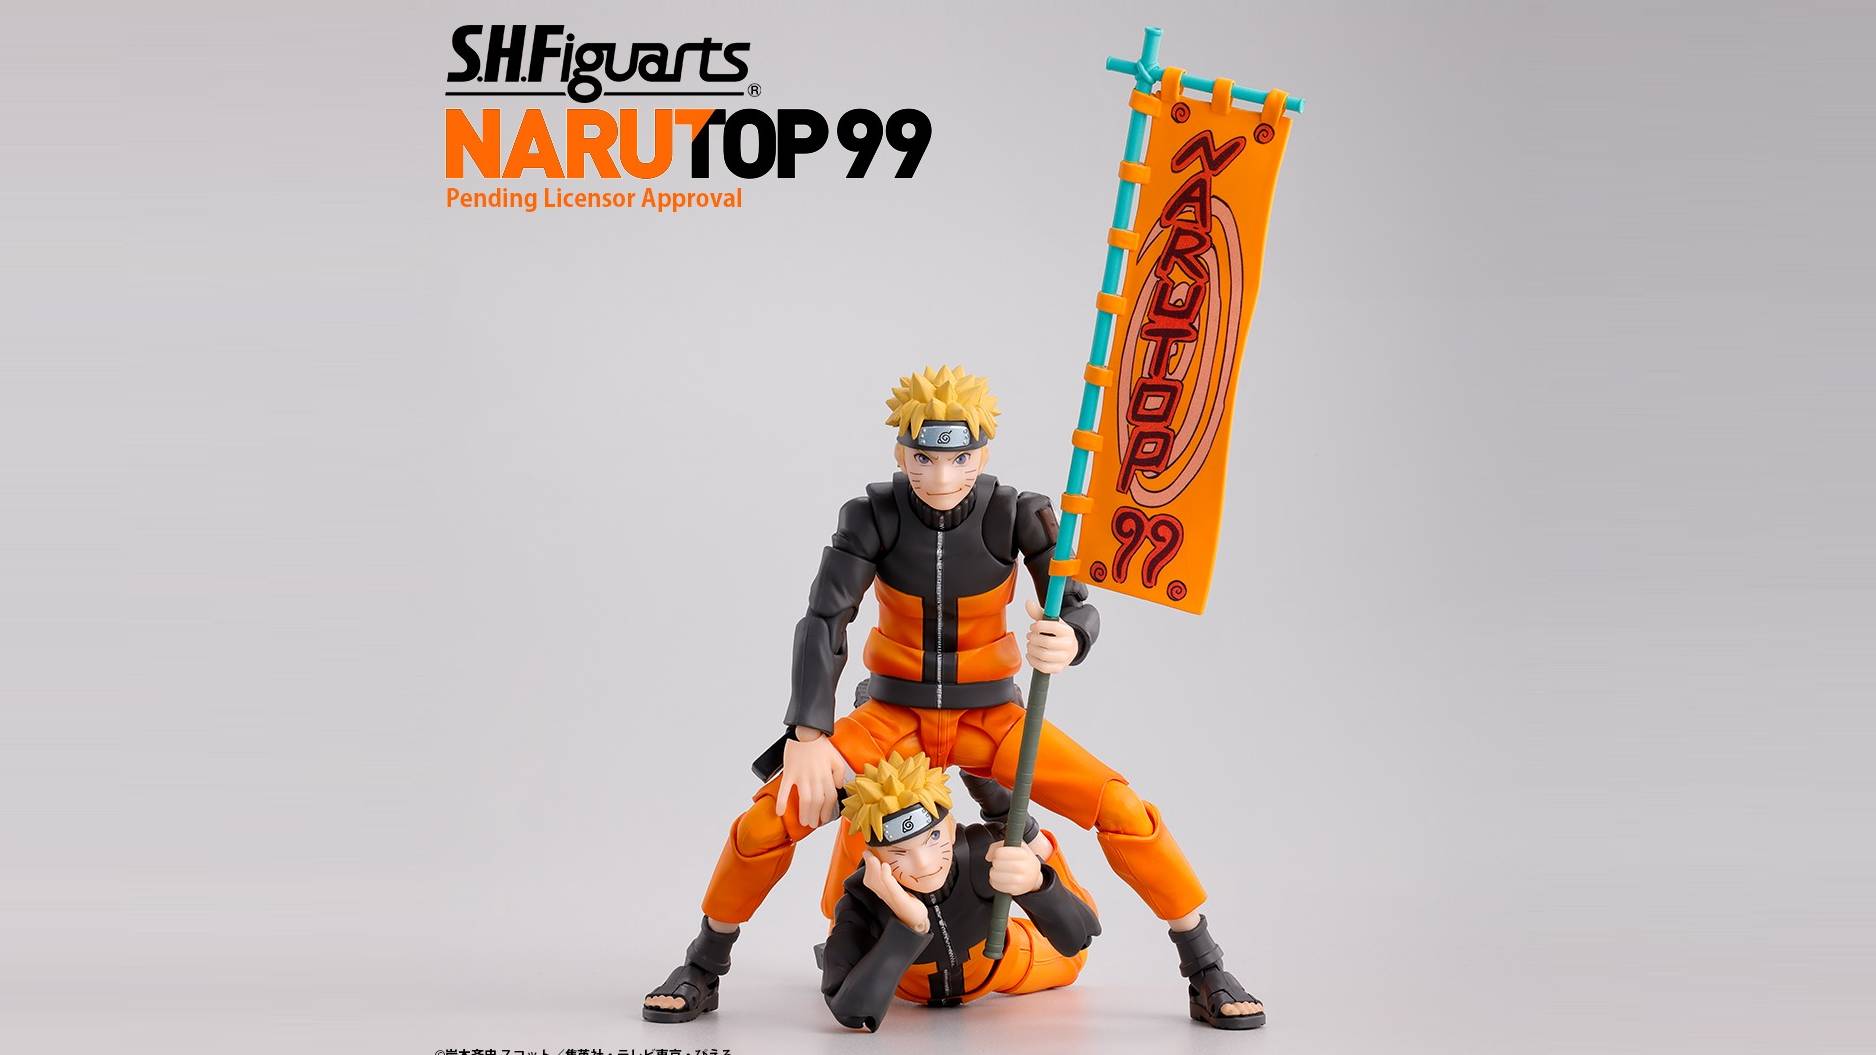 The Top Ten Contestants for the NarutoTop99! The winner will get his o